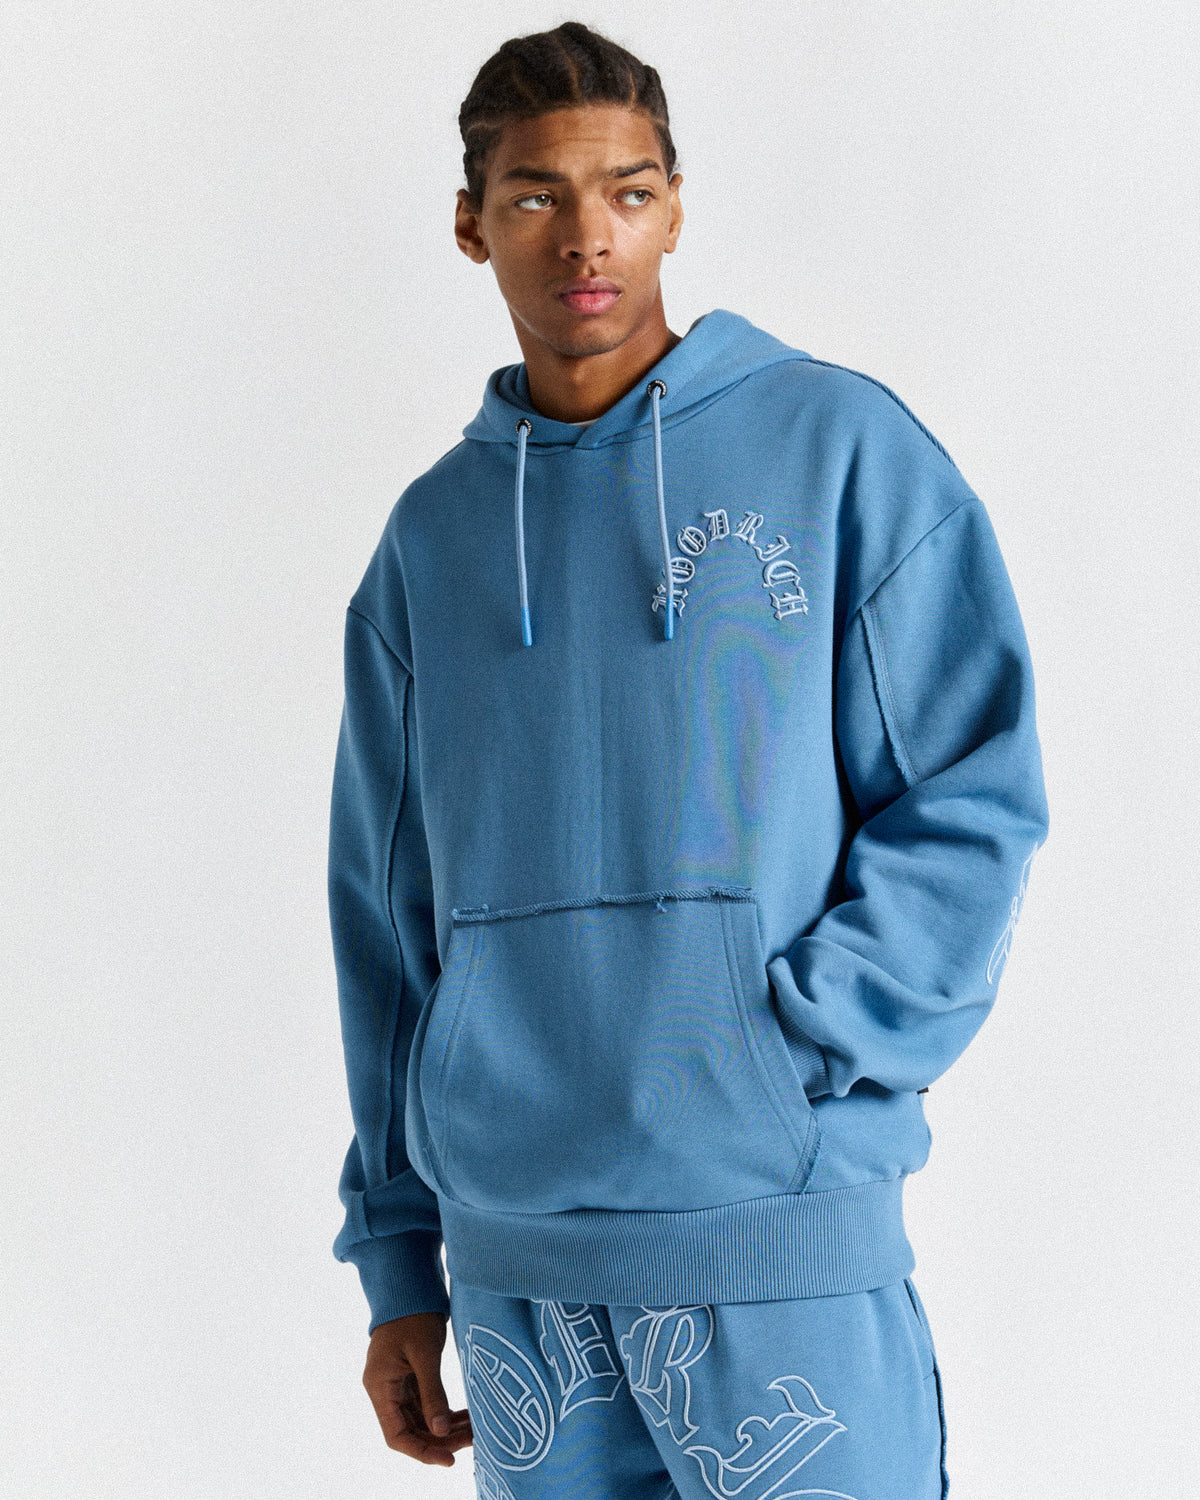 Designer Clothing Mens Hoodies Sweatshirts 2023 Winter Sports Hoodie For  Men Hoodrich Tracksuit Letter Towel Embroidered Sweatshirt Colorful Blue  Solid Swea L12 From Hcwww88, $21.02